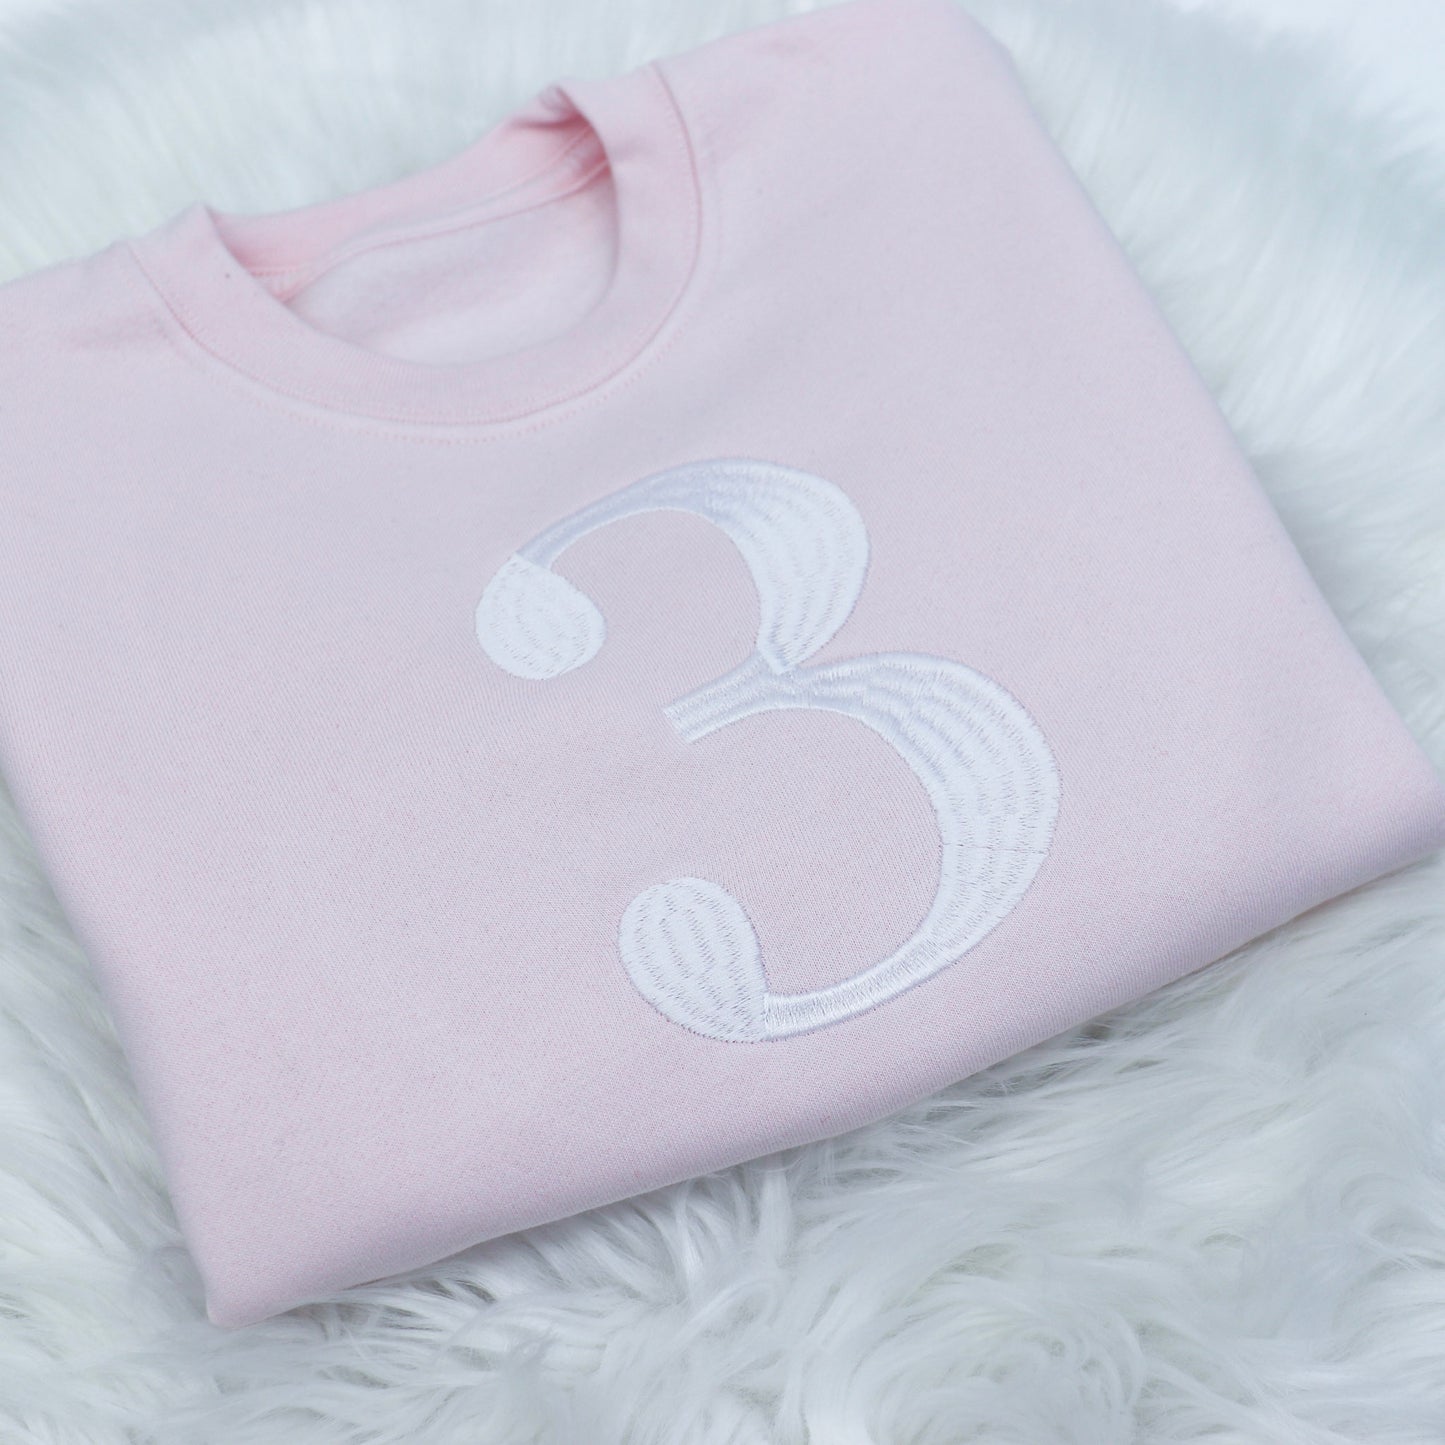 Giant Number Birthday Embroidered Soft Style Sweatshirt